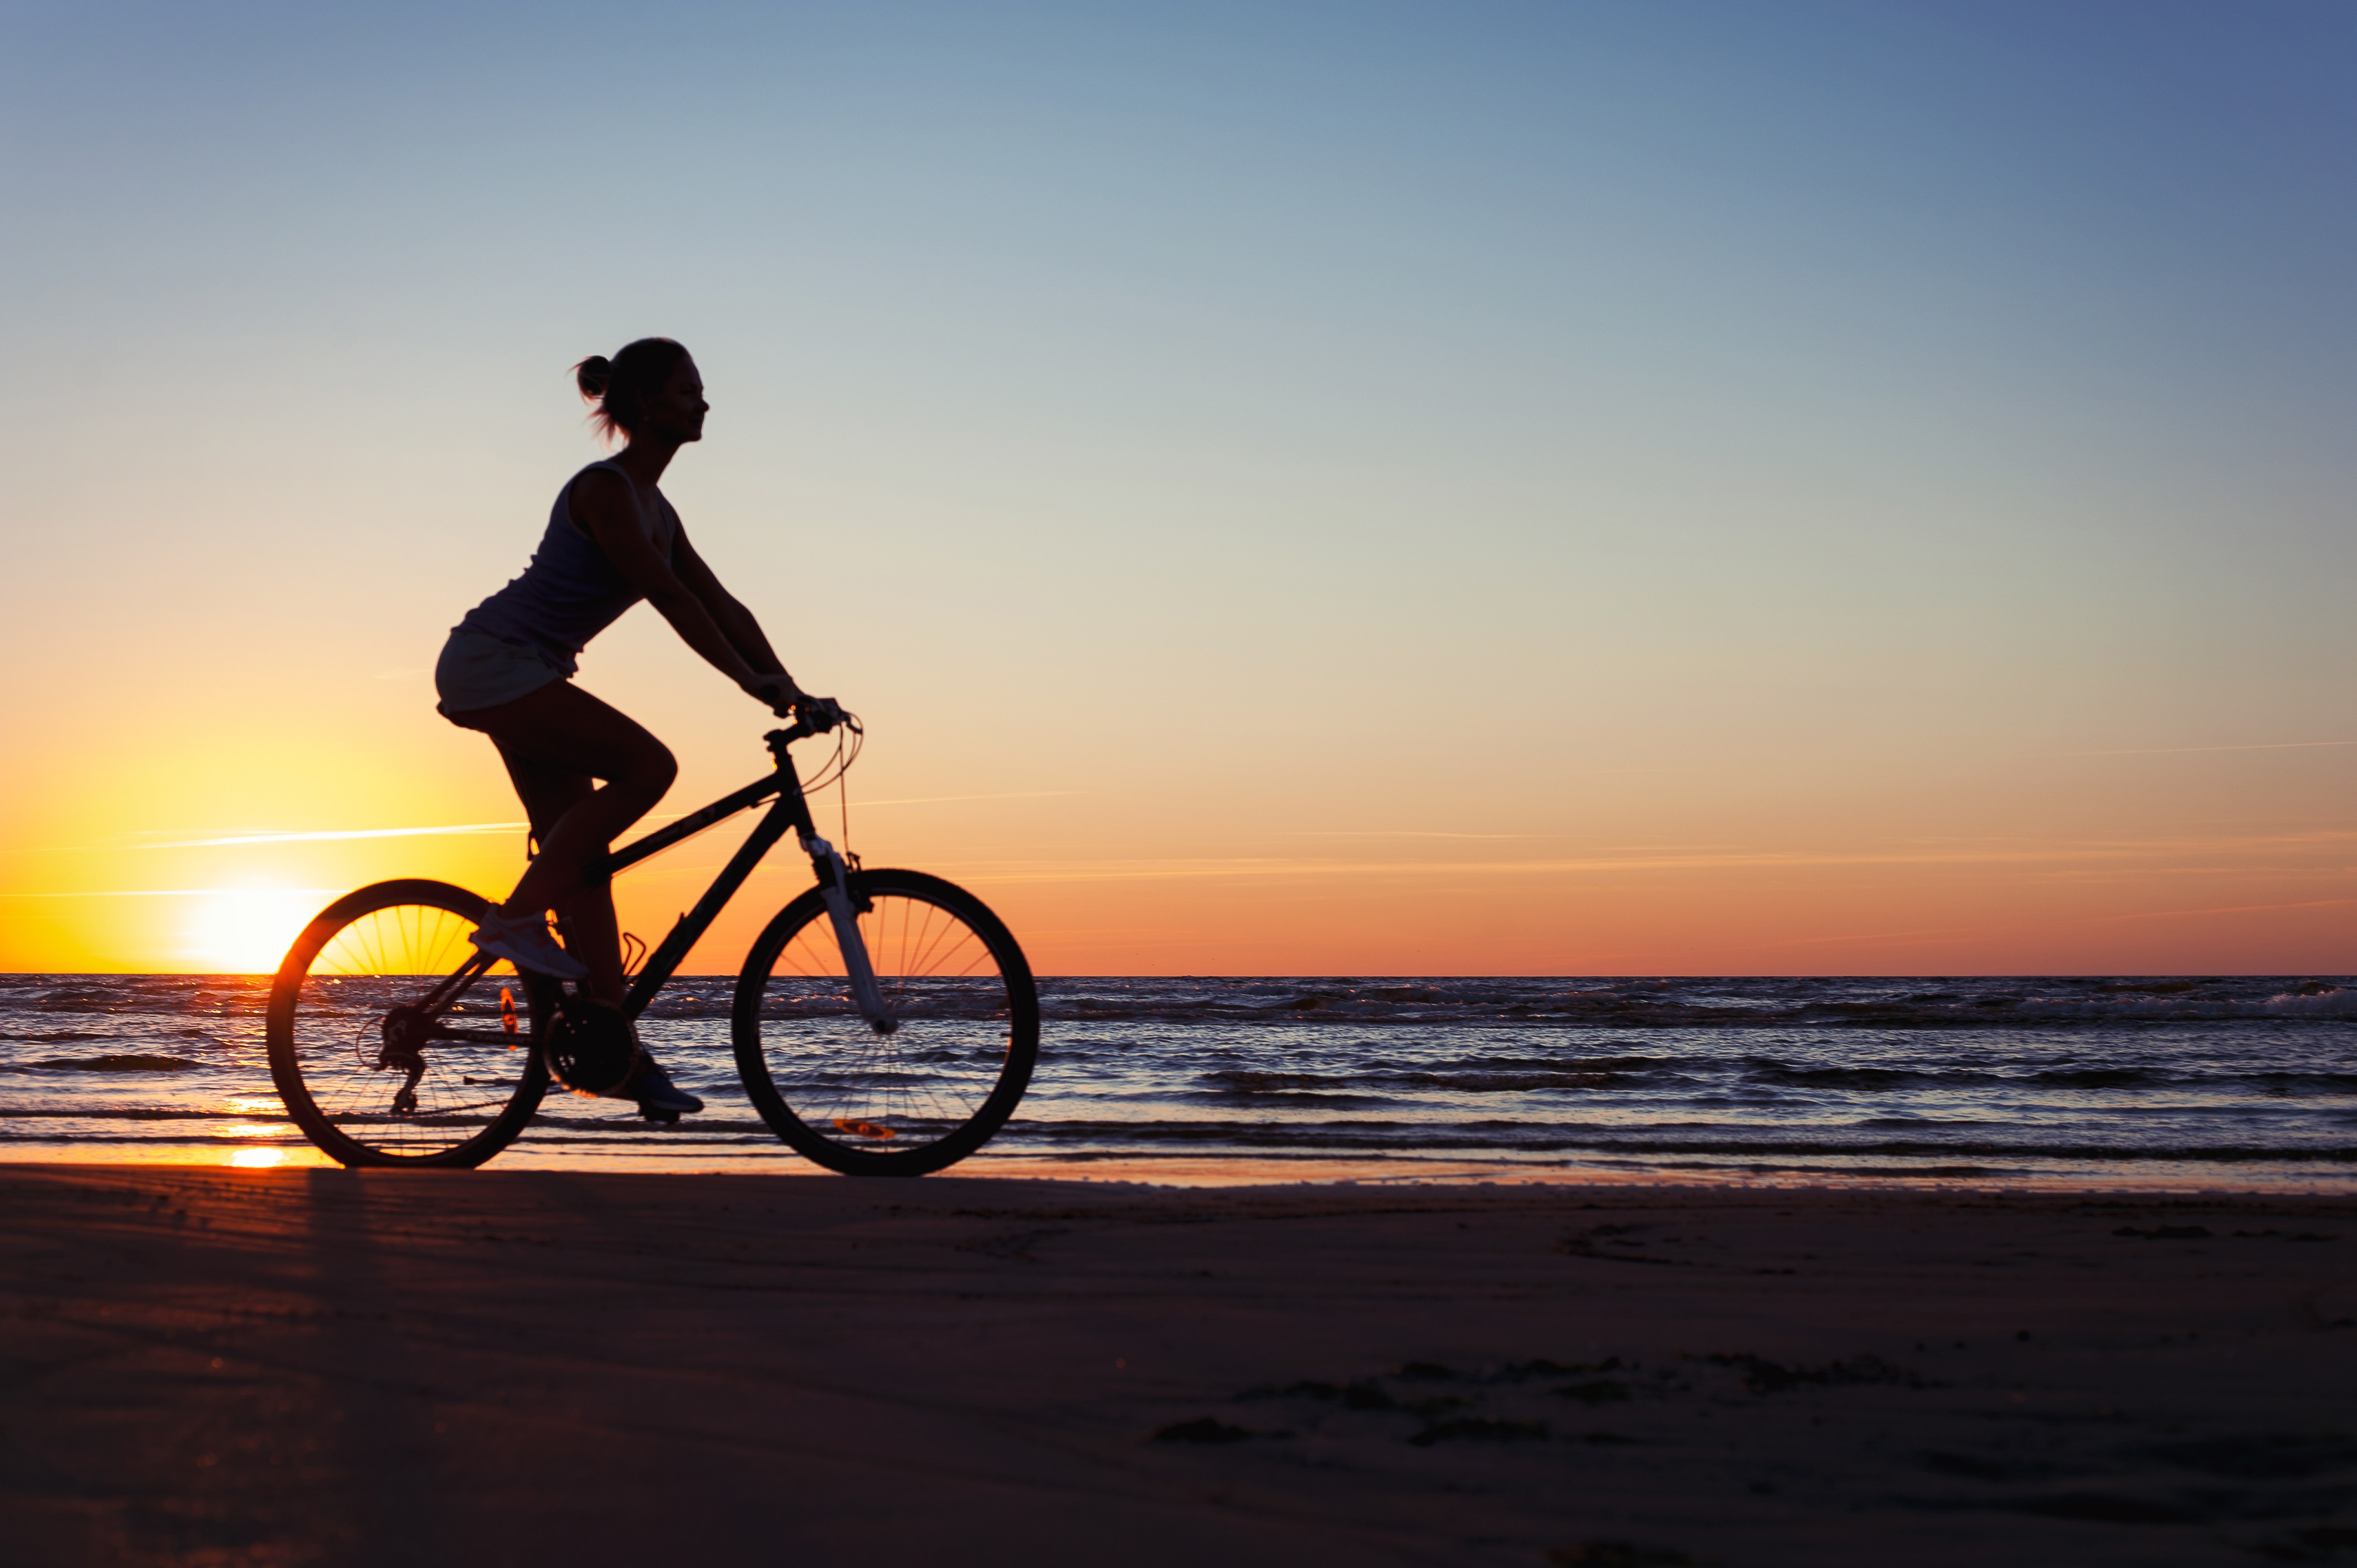 Biking for leisure can be a fun holiday activity